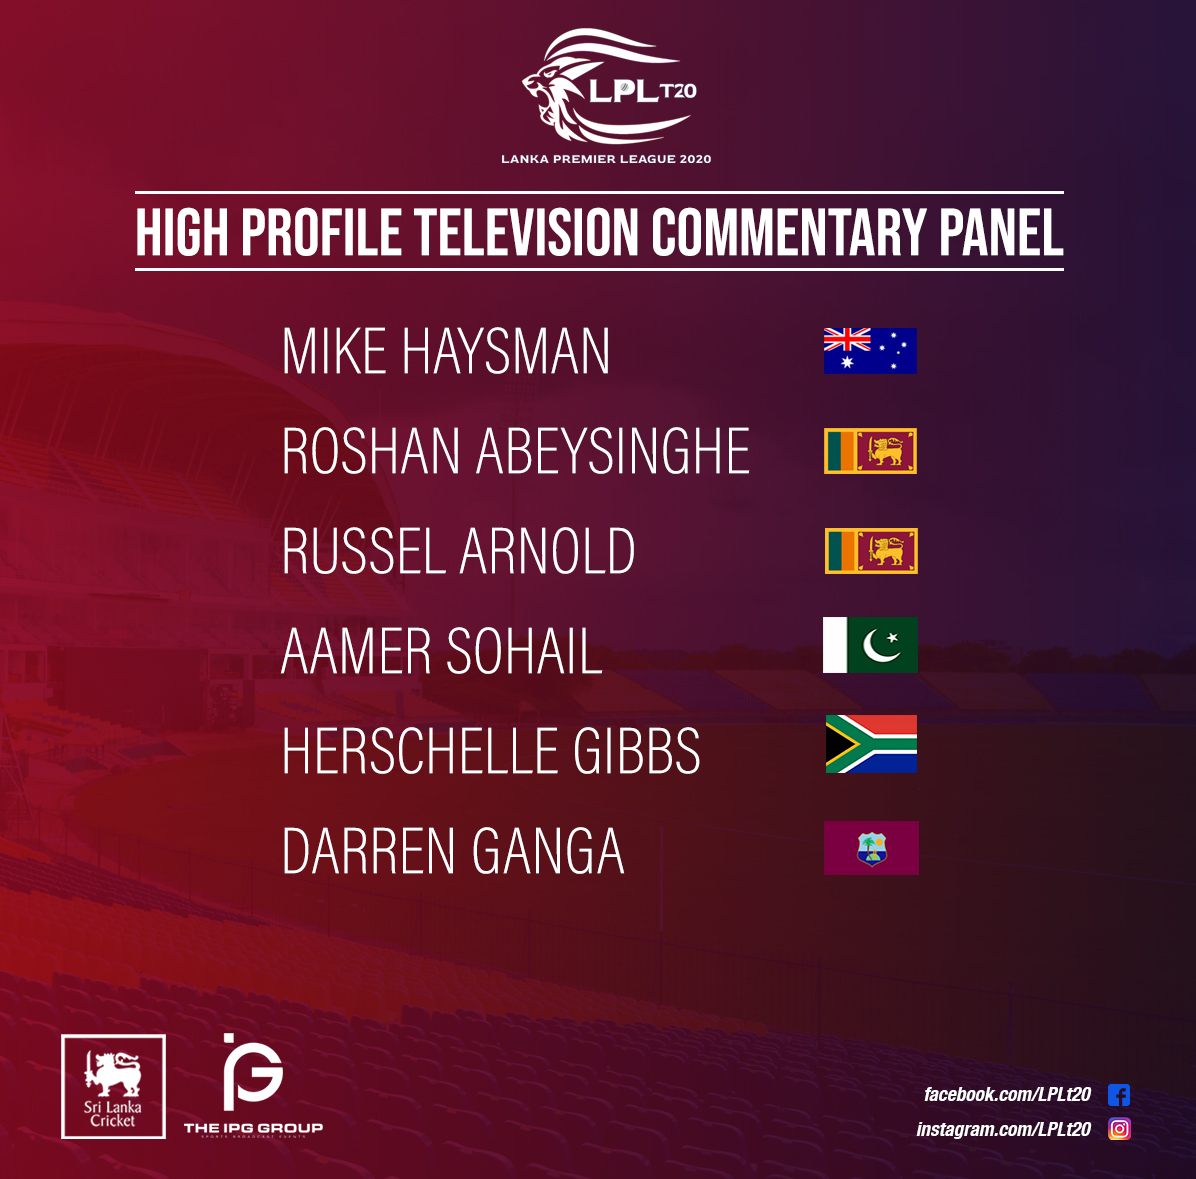 High Profile Television Commentary Panel for the LPL 2020